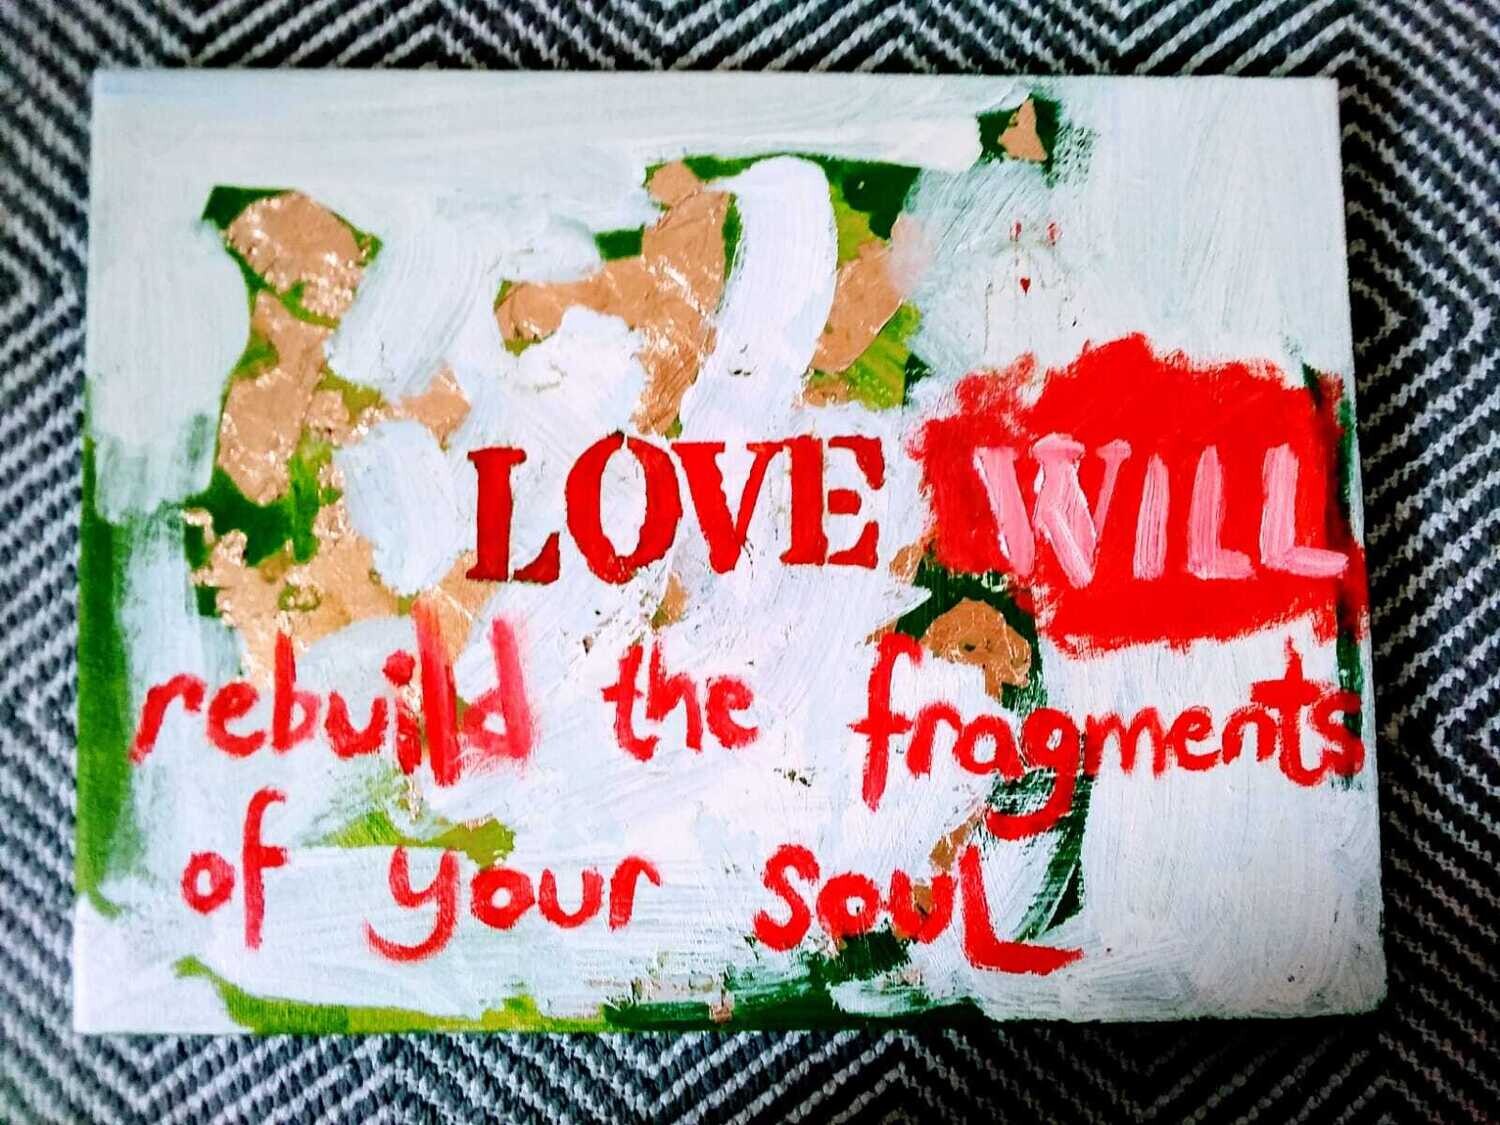 Love will rebuild the fragments of your soul